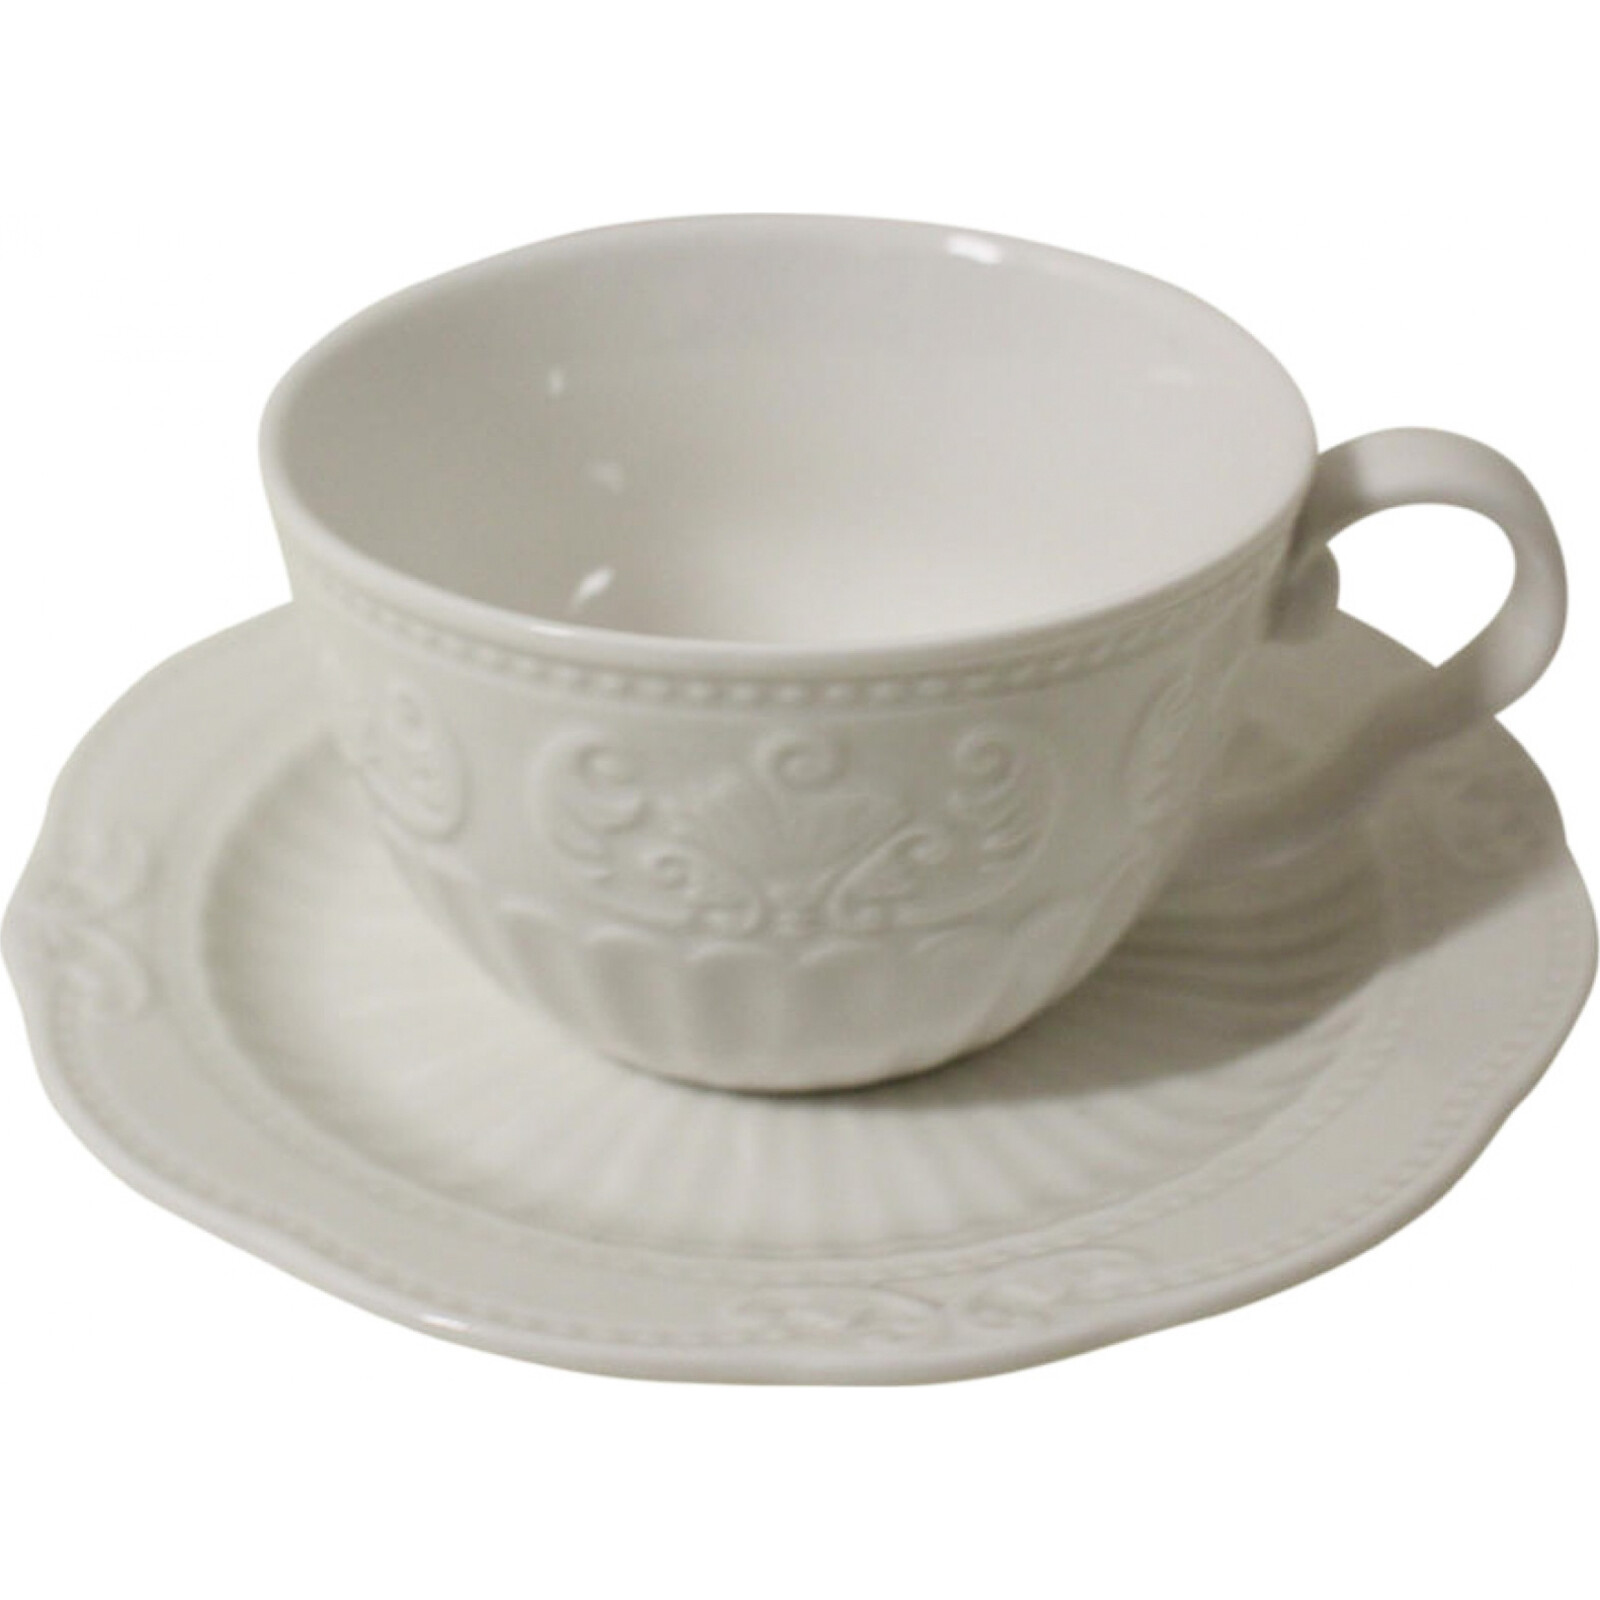 Teacup & Saucer Pearl White